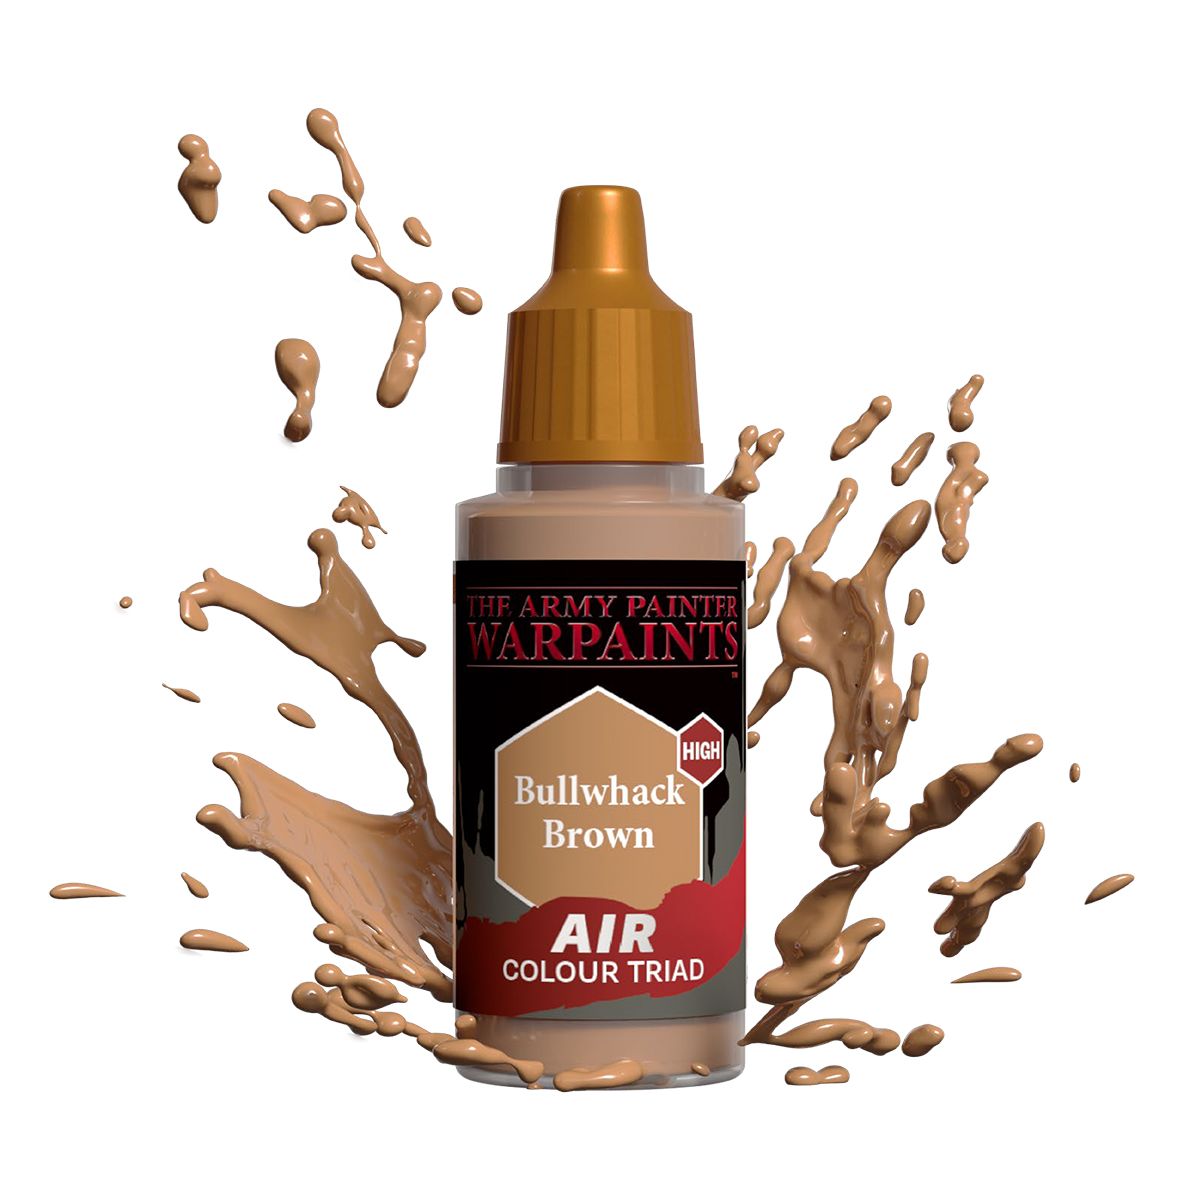 Army Painter Warpaints - Air Bullwhack Brown Acrylic Paint 18ml